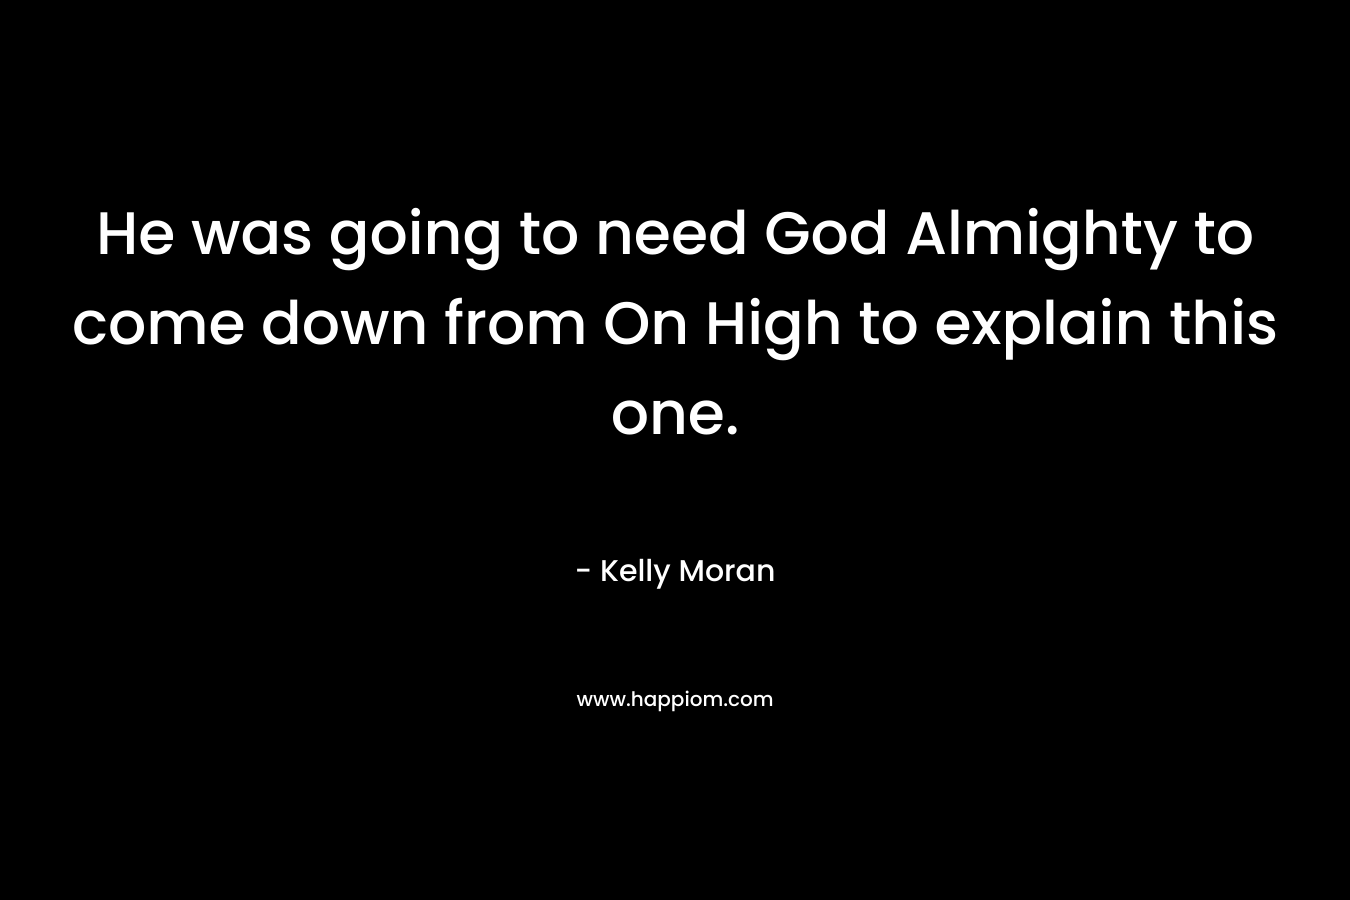 He was going to need God Almighty to come down from On High to explain this one. – Kelly Moran